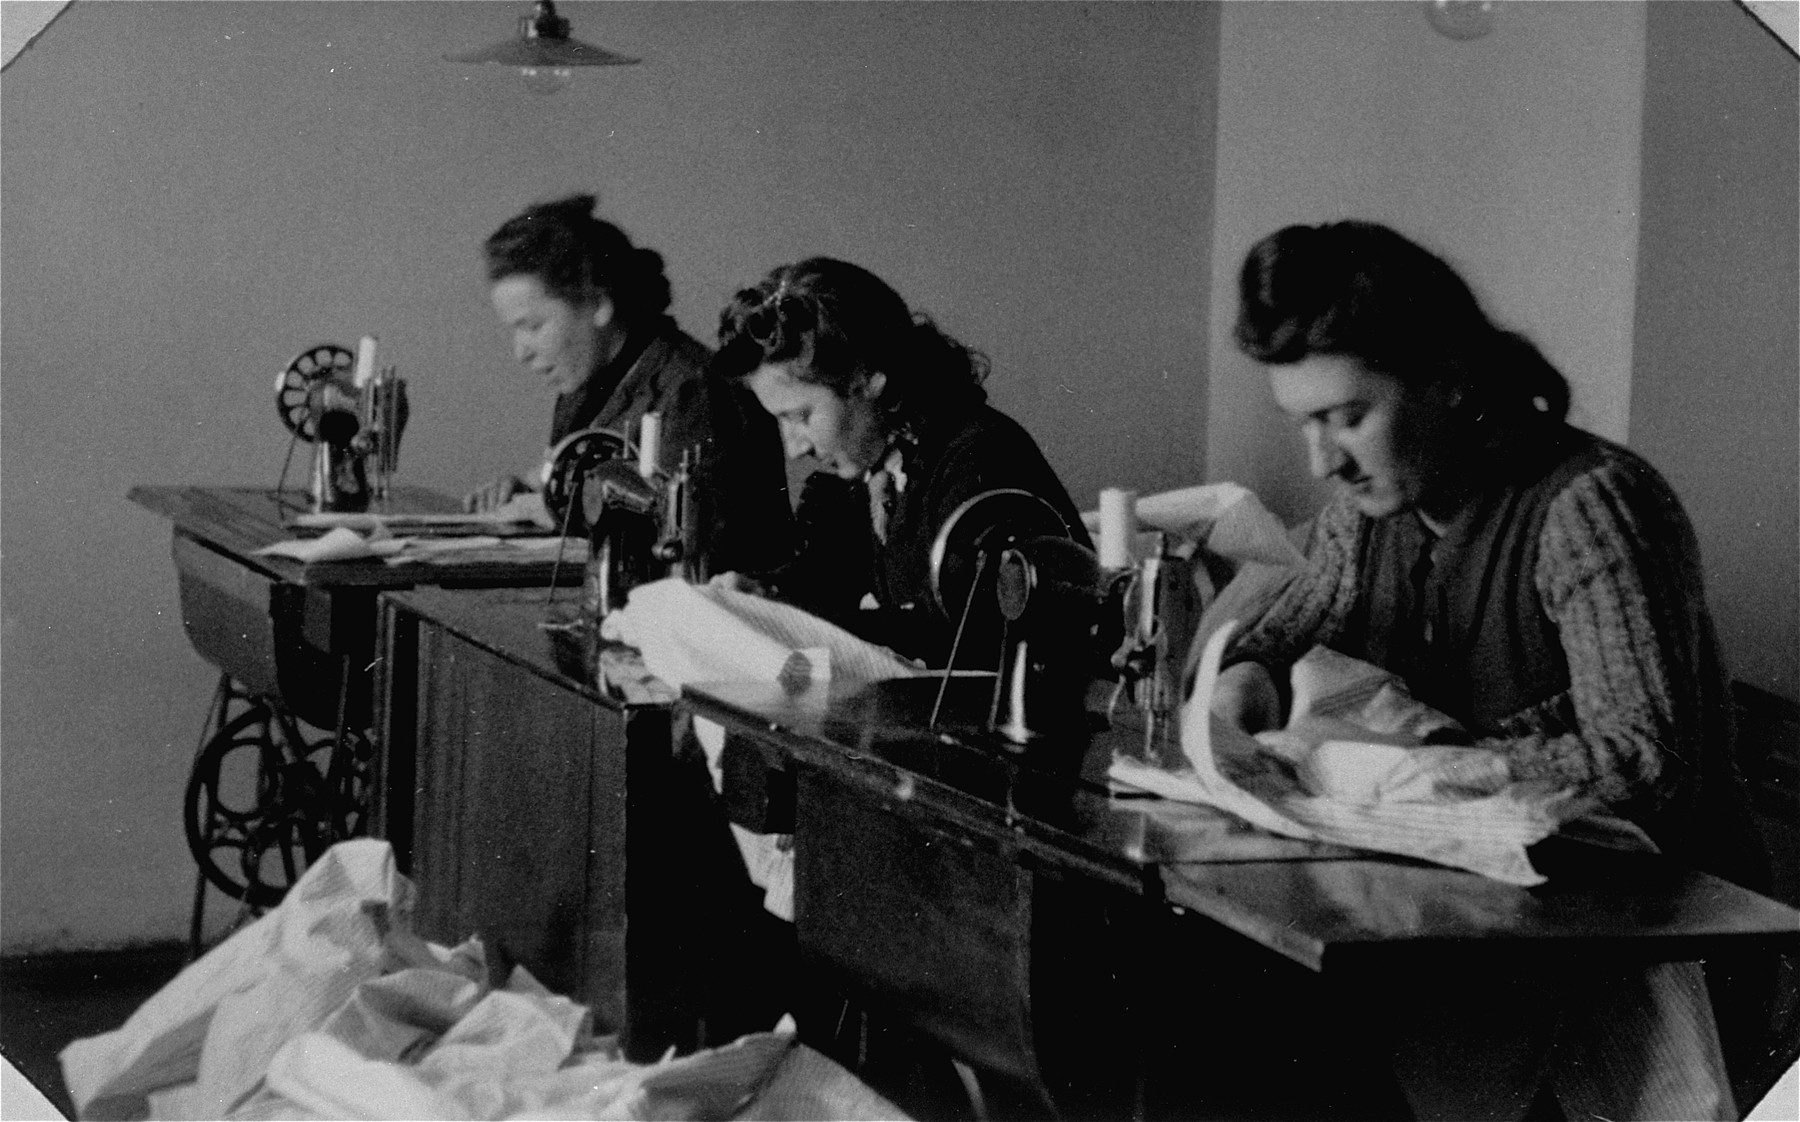 Jewish women work at sewing machines in a workshop in the Bochnia ghetto.